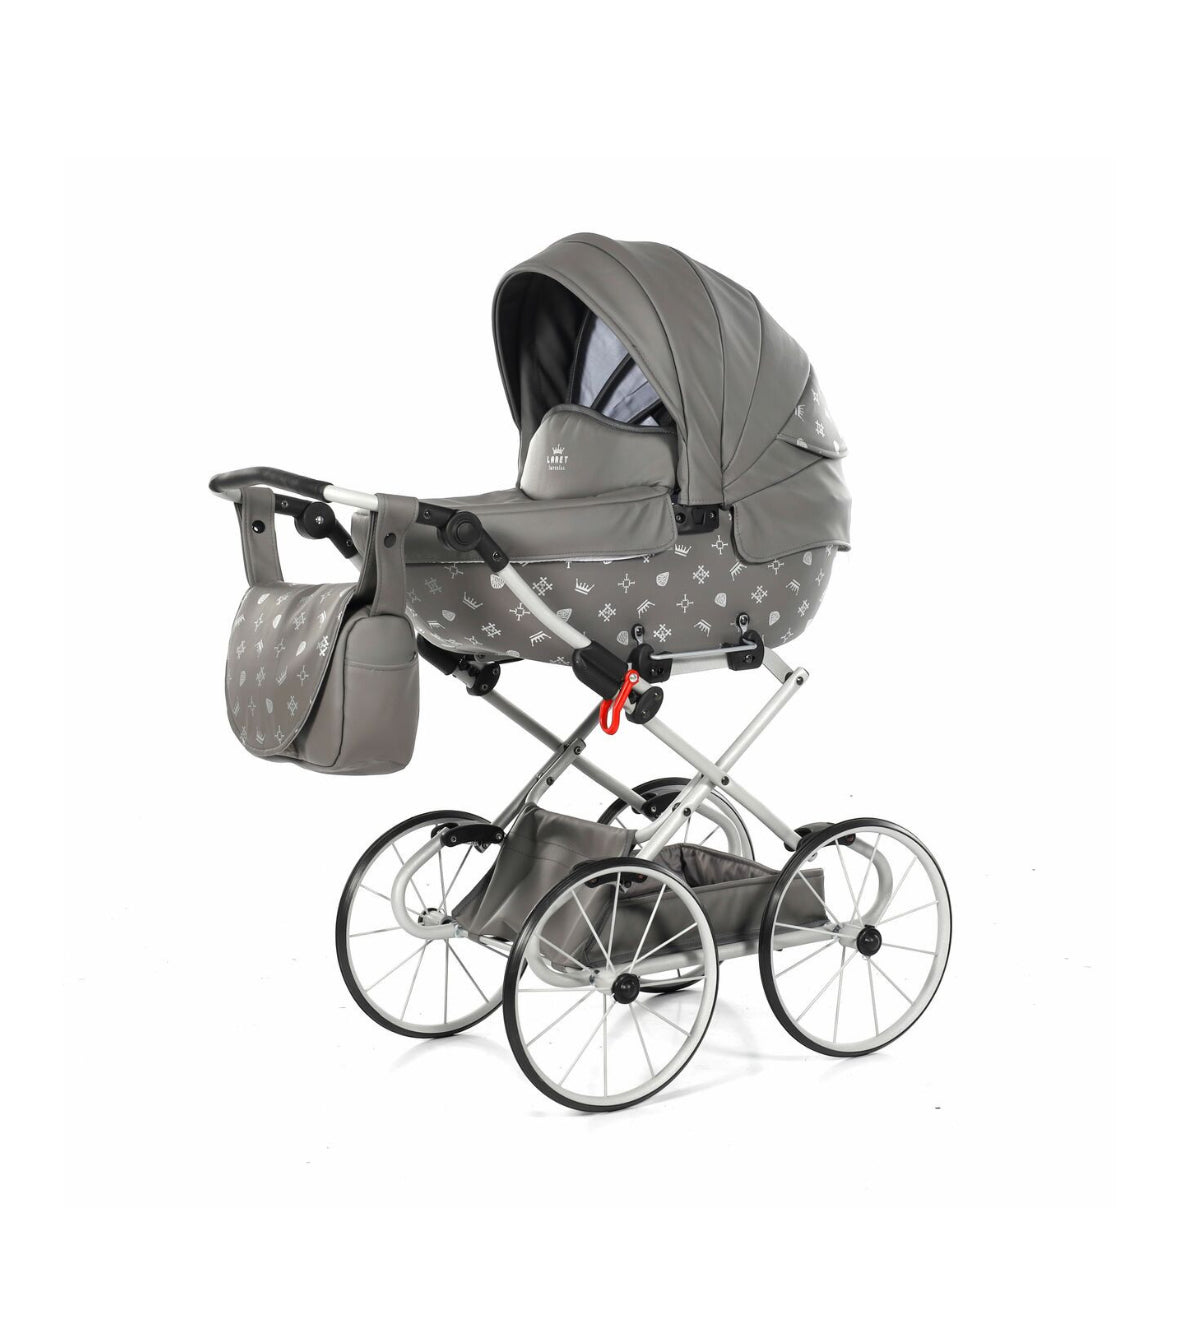 IMPERIAL CLASSIC GREY DOLL'S PRAM (1-2 days delivery)